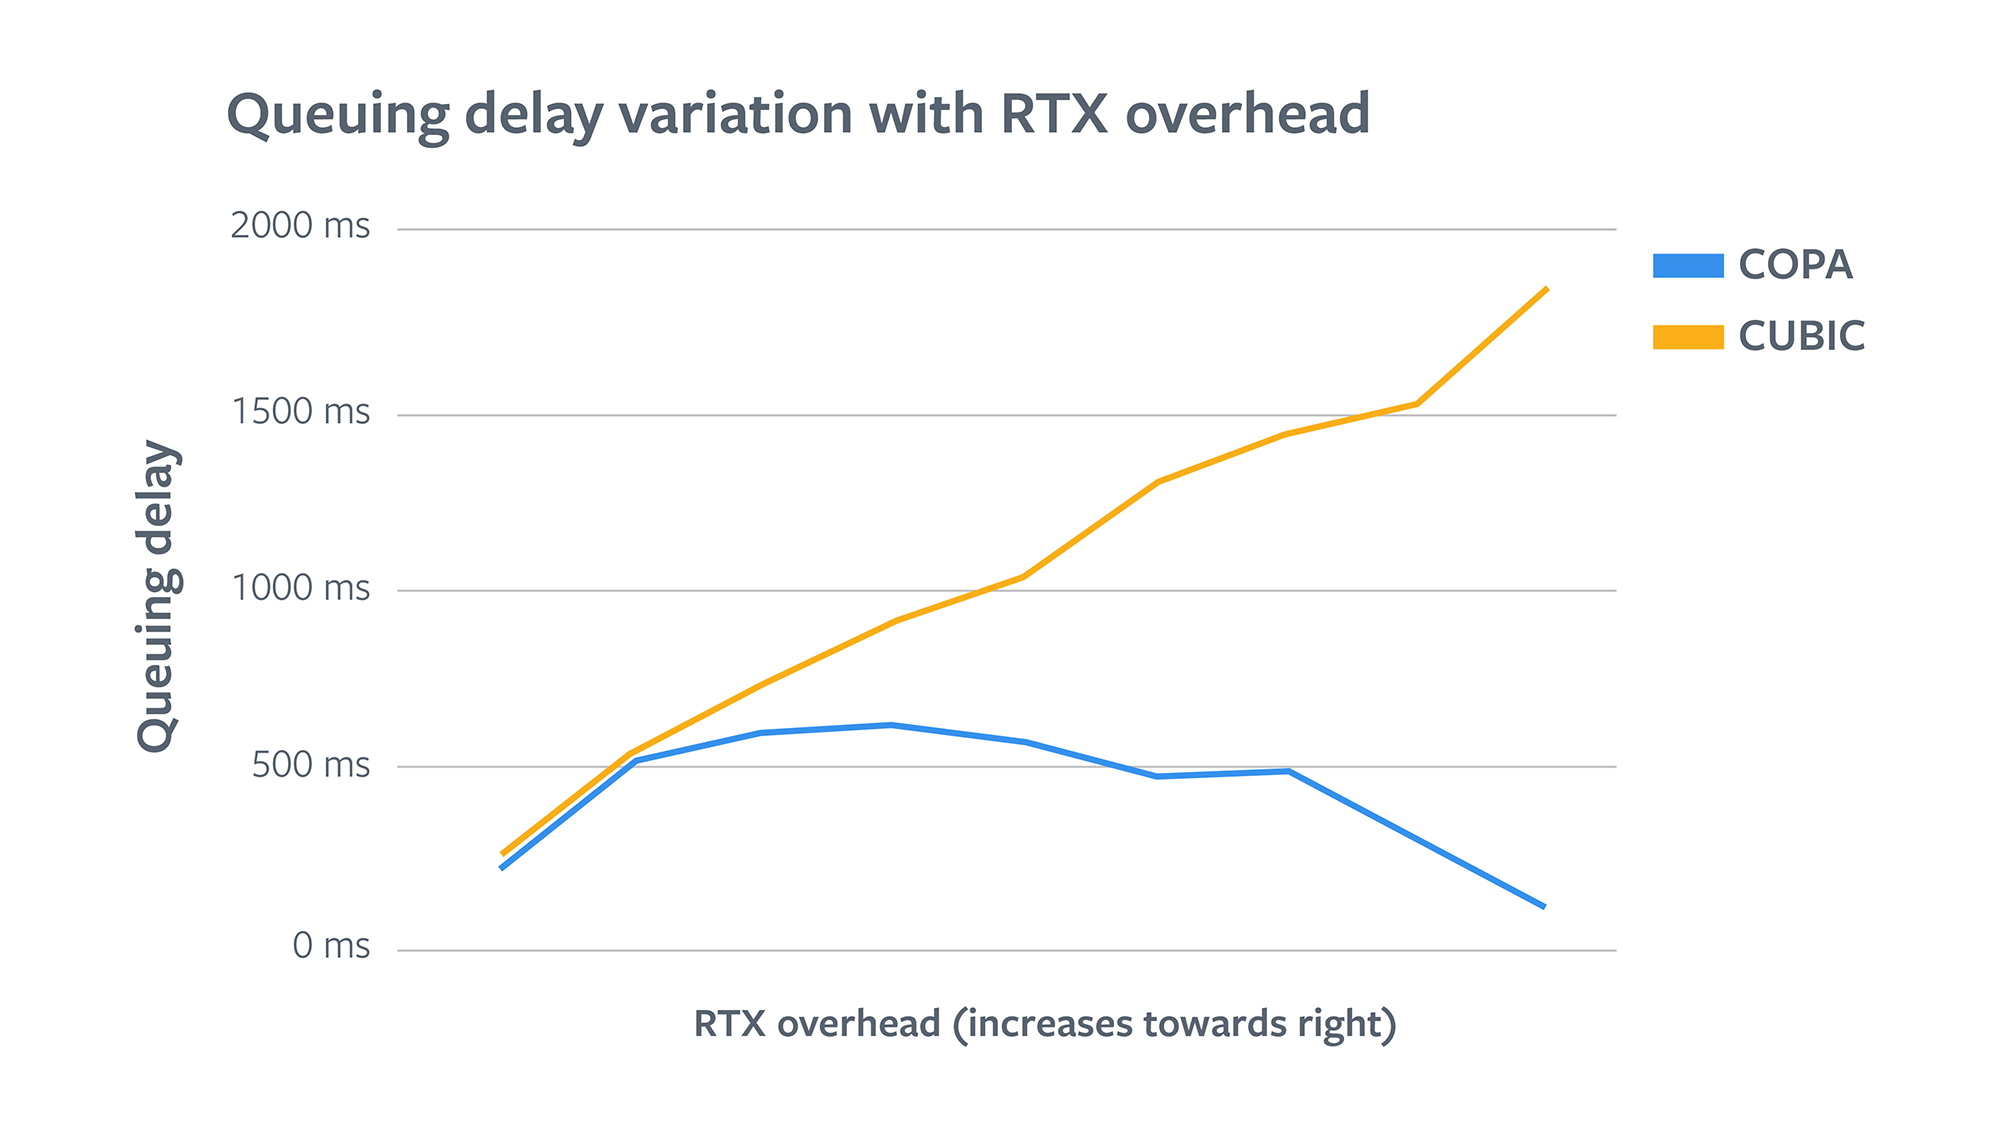 Queueing delay variation with RTX overhead